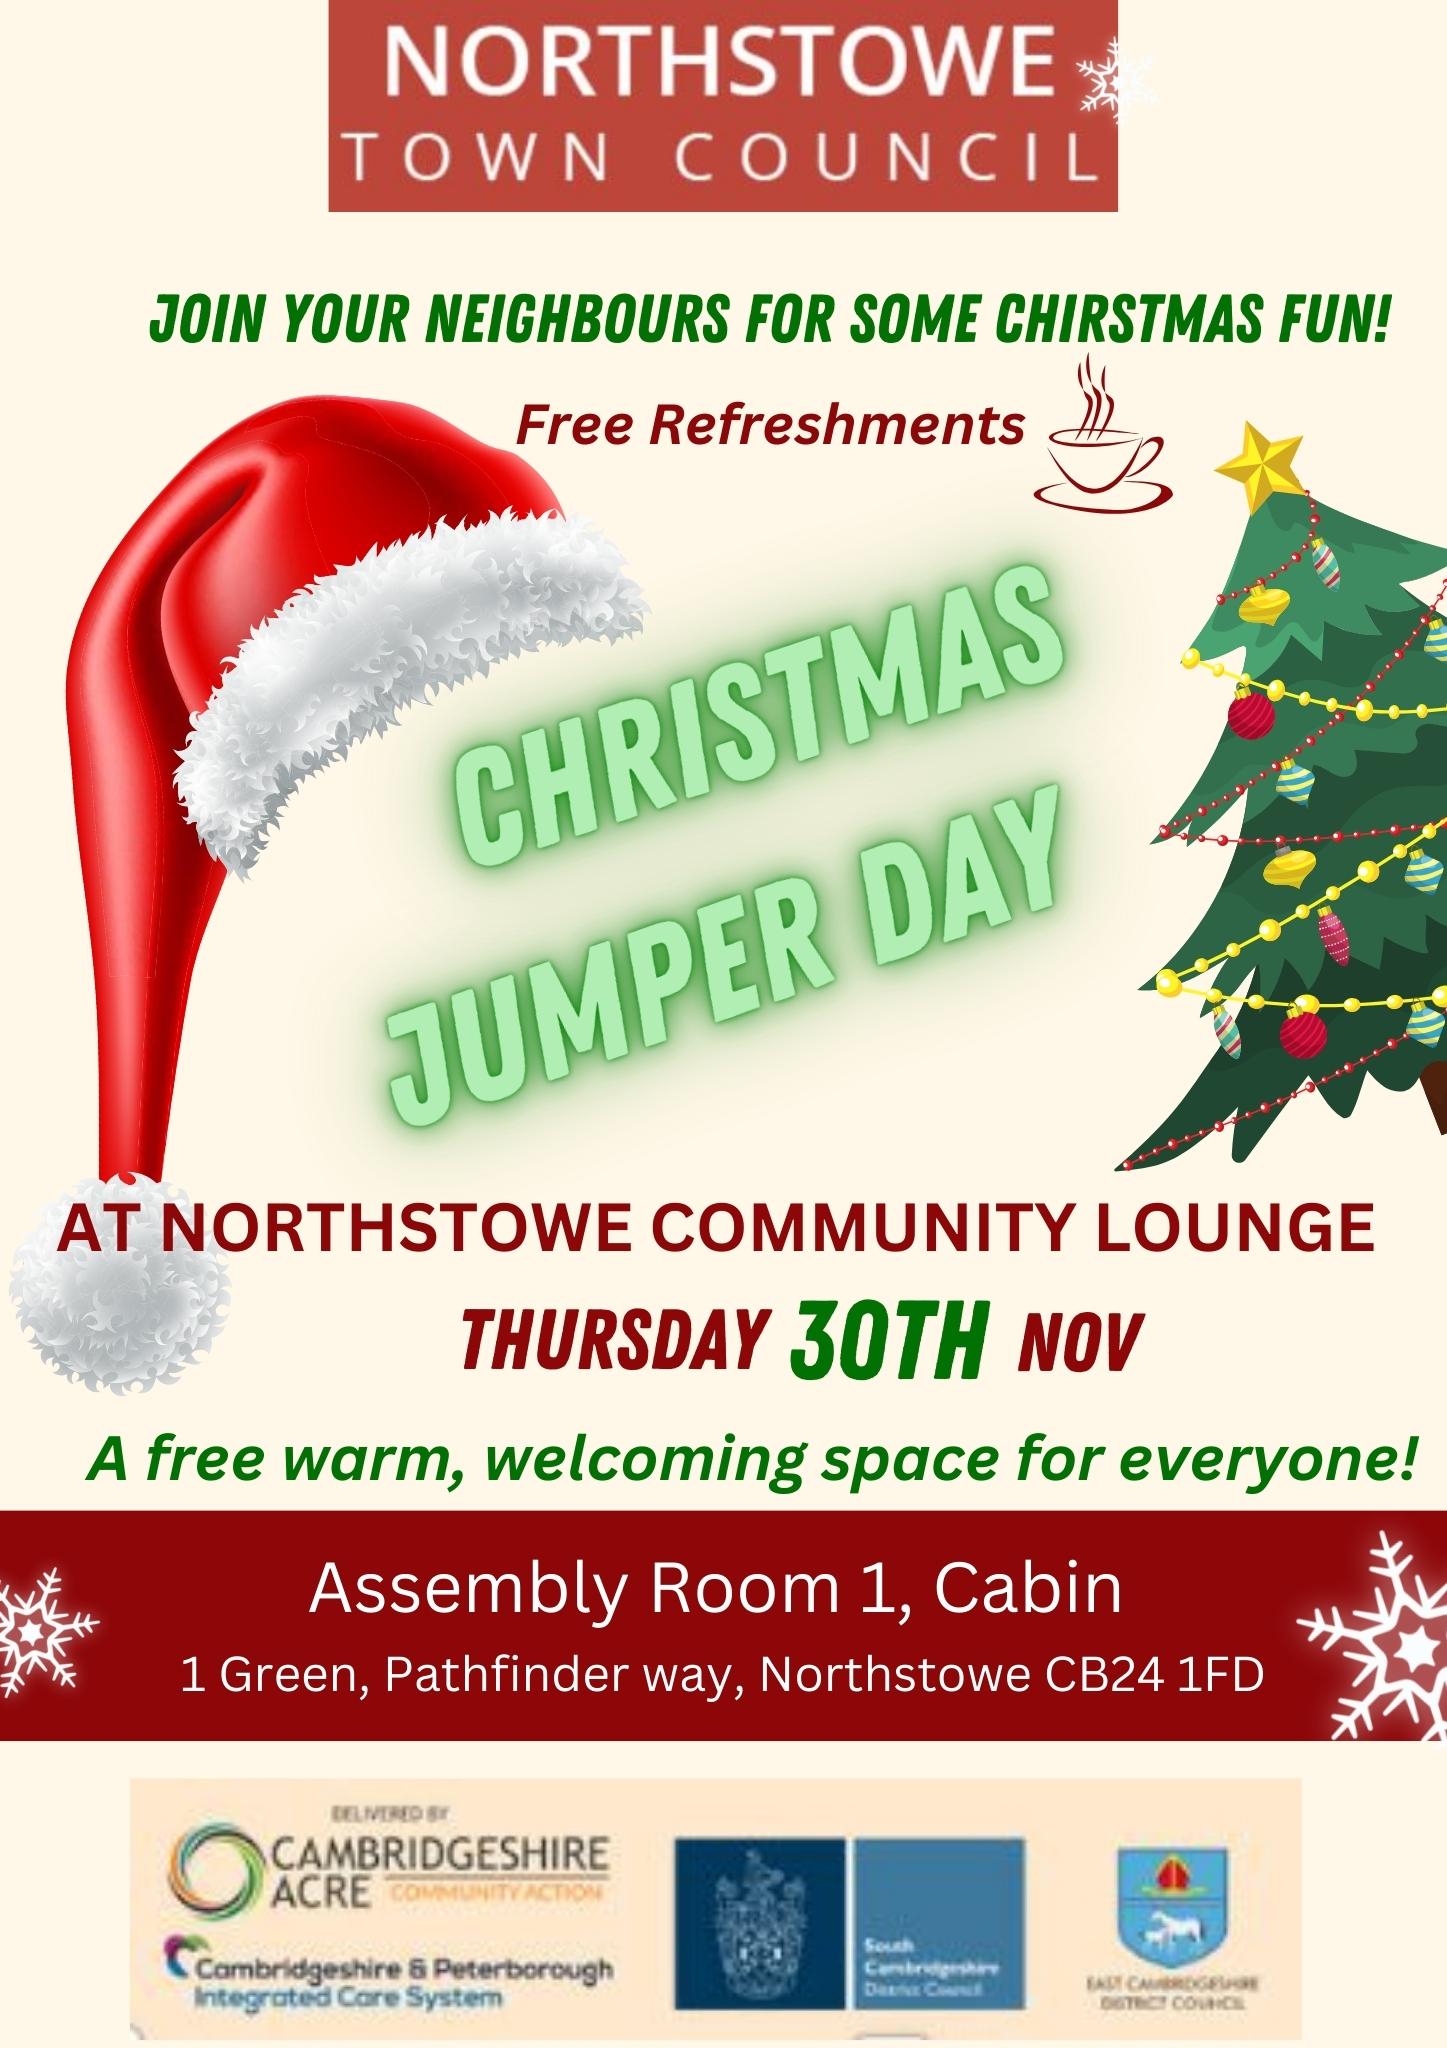 This Thursday 6-8PM: Xmas jumper day! #NorthstoweCommunityLounge